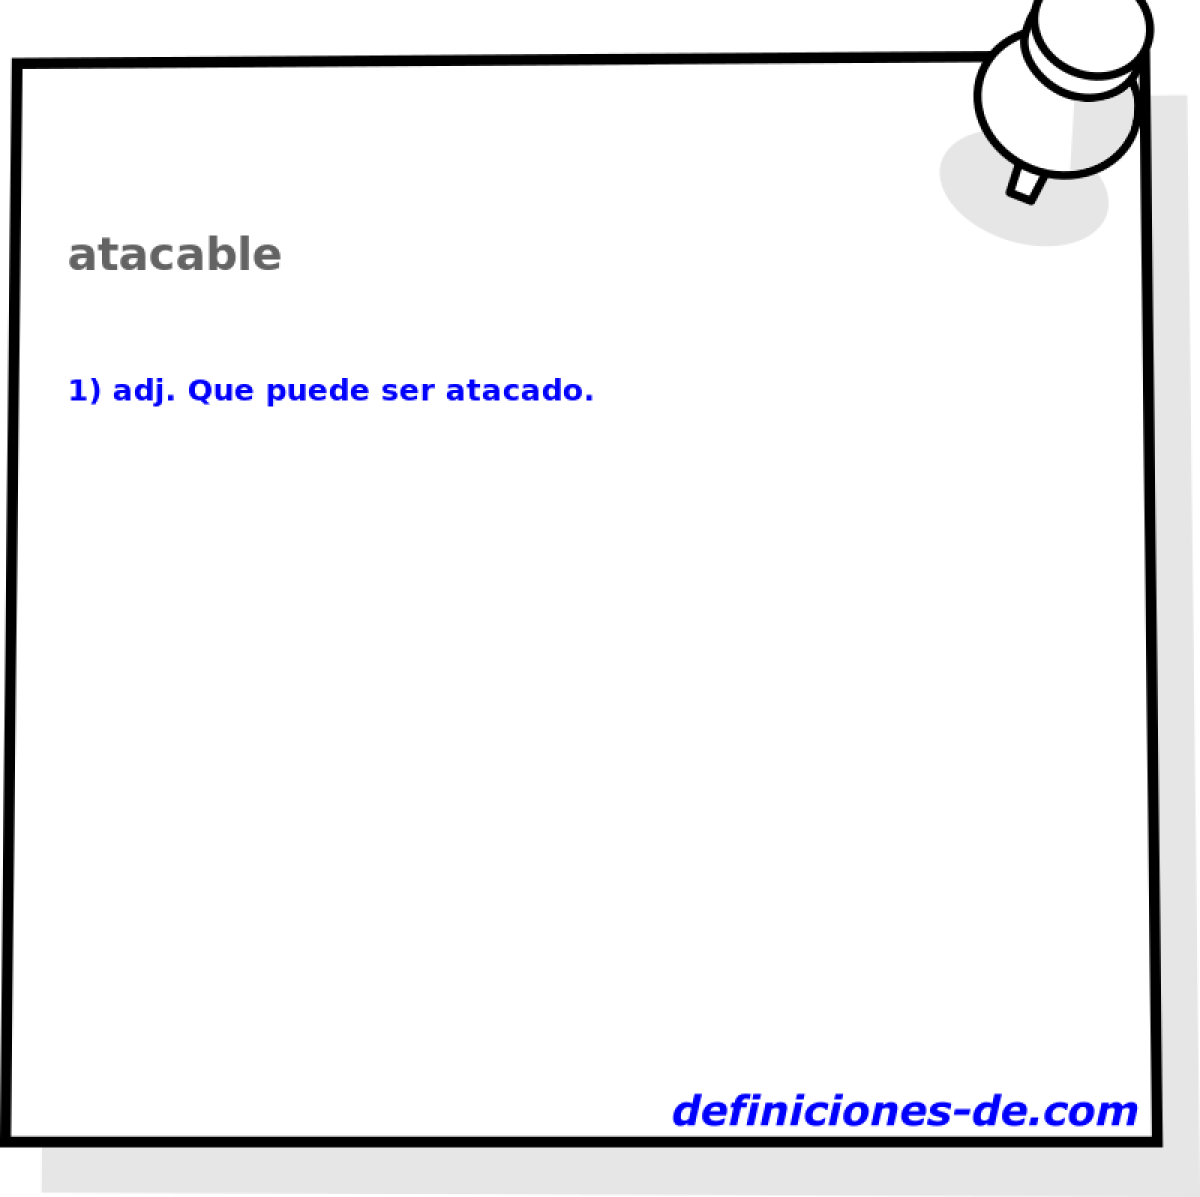 atacable 